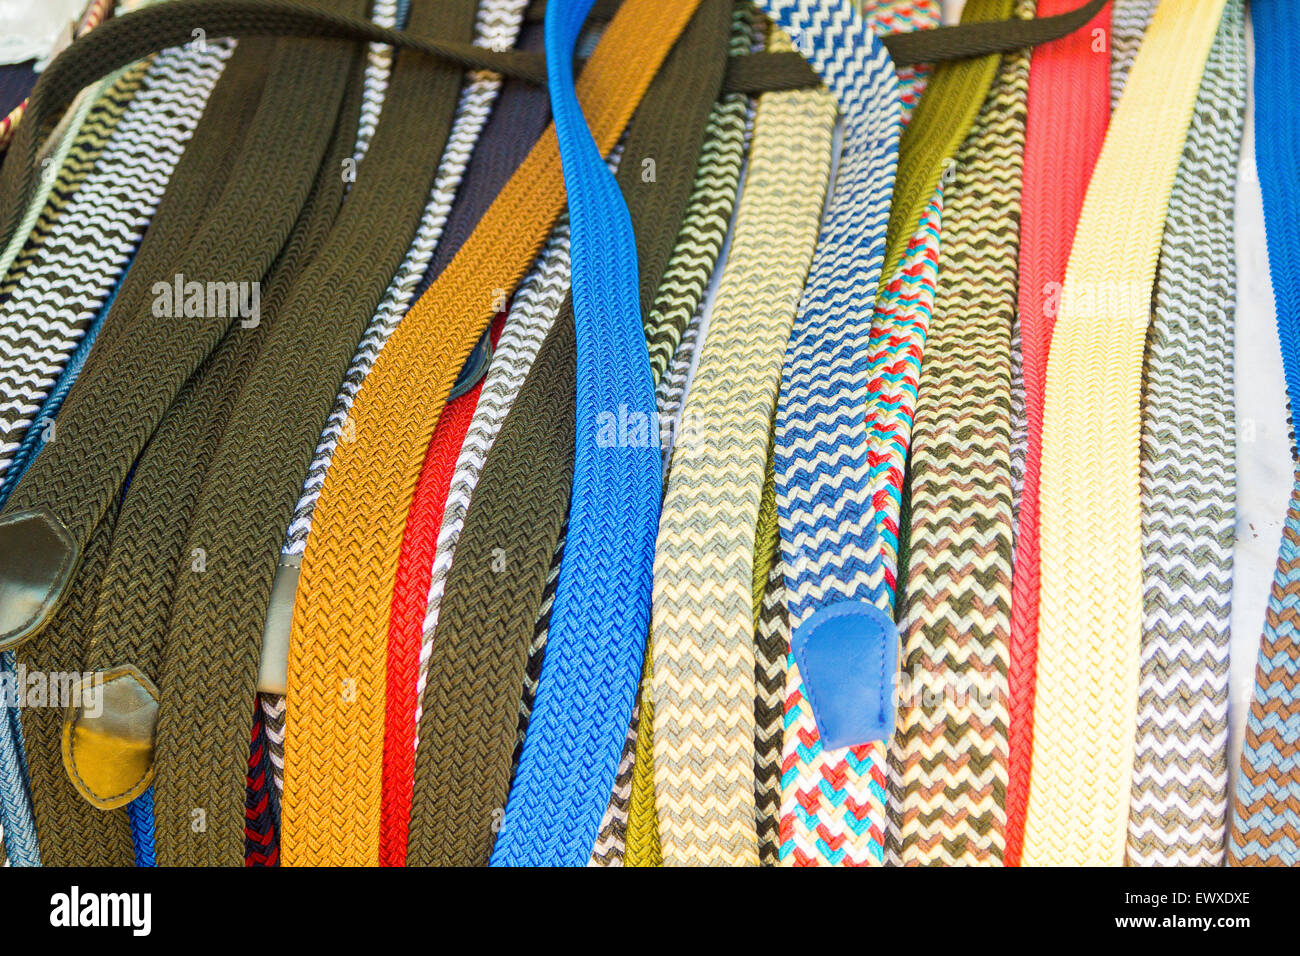 colorful fabric belts Stock Photo